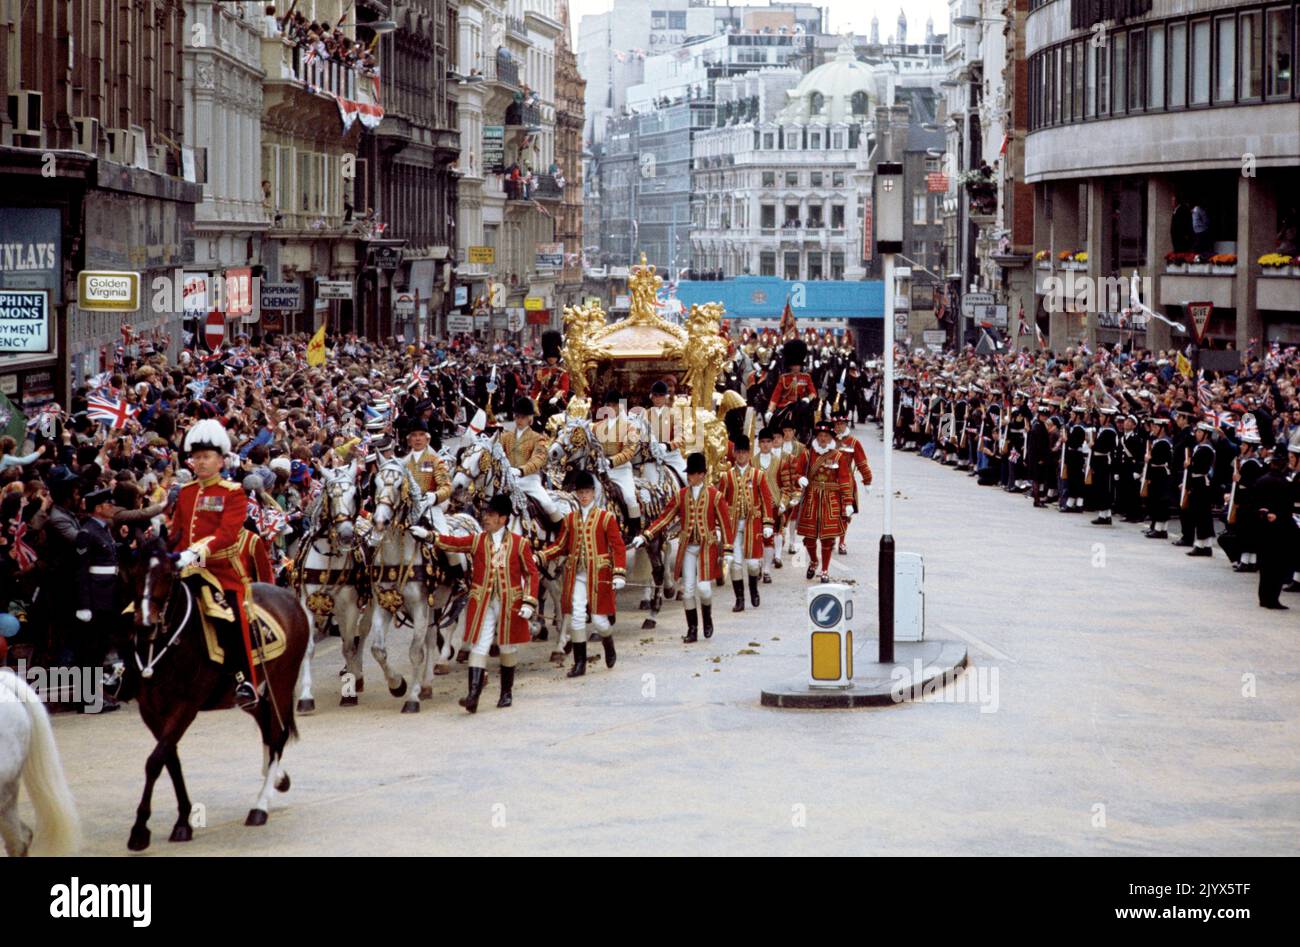 File photo dated 07/06/1977 of the Golden State Coach with Queen Elizabeth II and Duke of Edinburgh Ride in a Carriage up Ludgate Hill to St Paul's Cathedral to attend a special Service of thanksgiving for the Silver Jubilee. Wie Buckingham Palace mitteilte, starb die Königin heute Nachmittag friedlich in Balmoral. Ausgabedatum: Donnerstag, 8. September 2022. Stockfoto